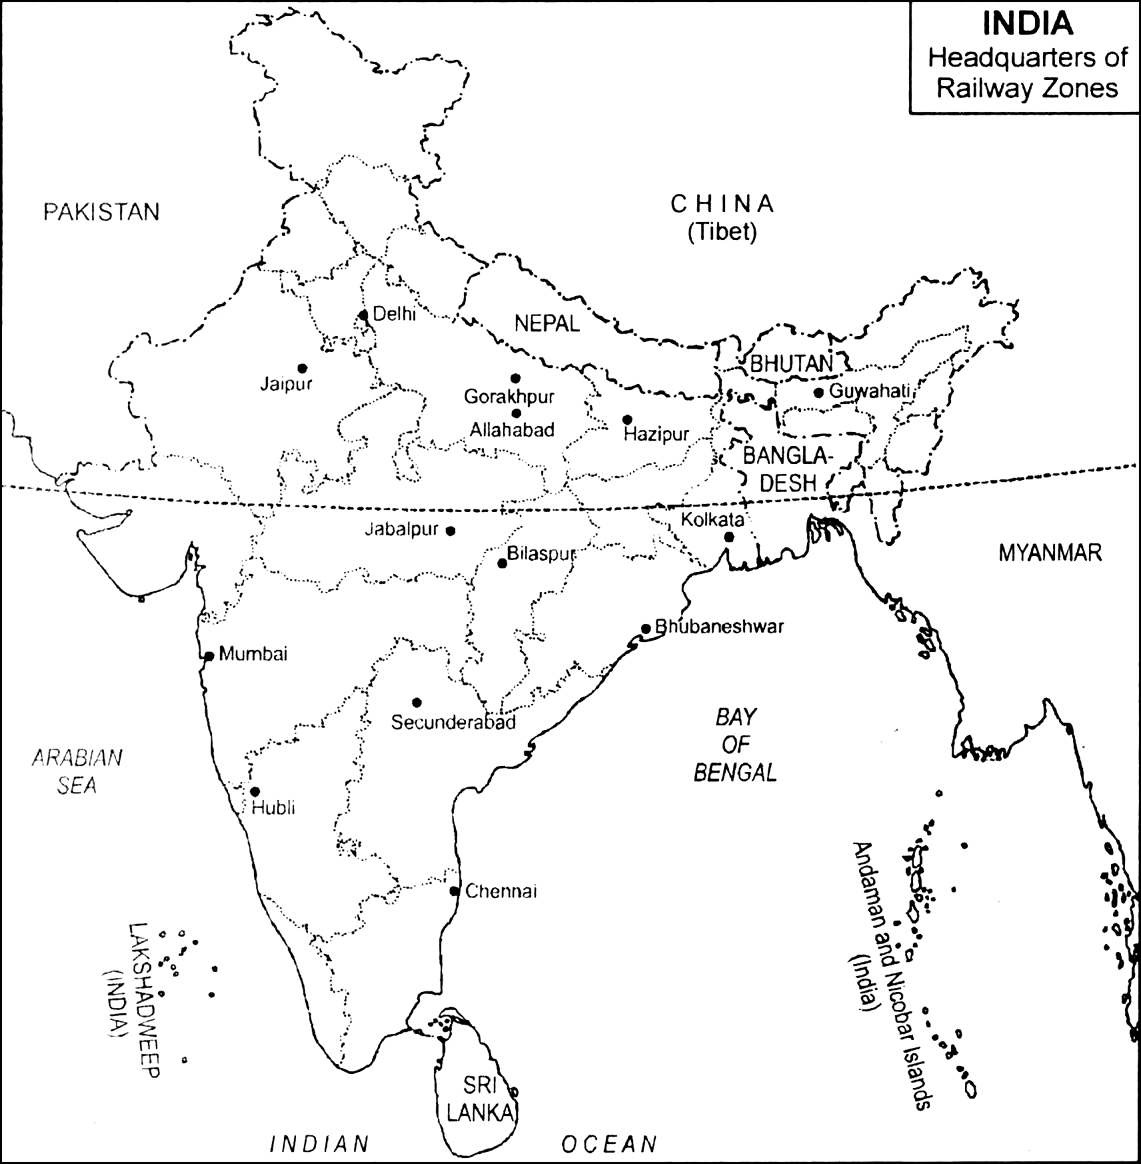 railway zones map in india Name The Current Zones Of Indian Railways With Their Headquarters railway zones map in india